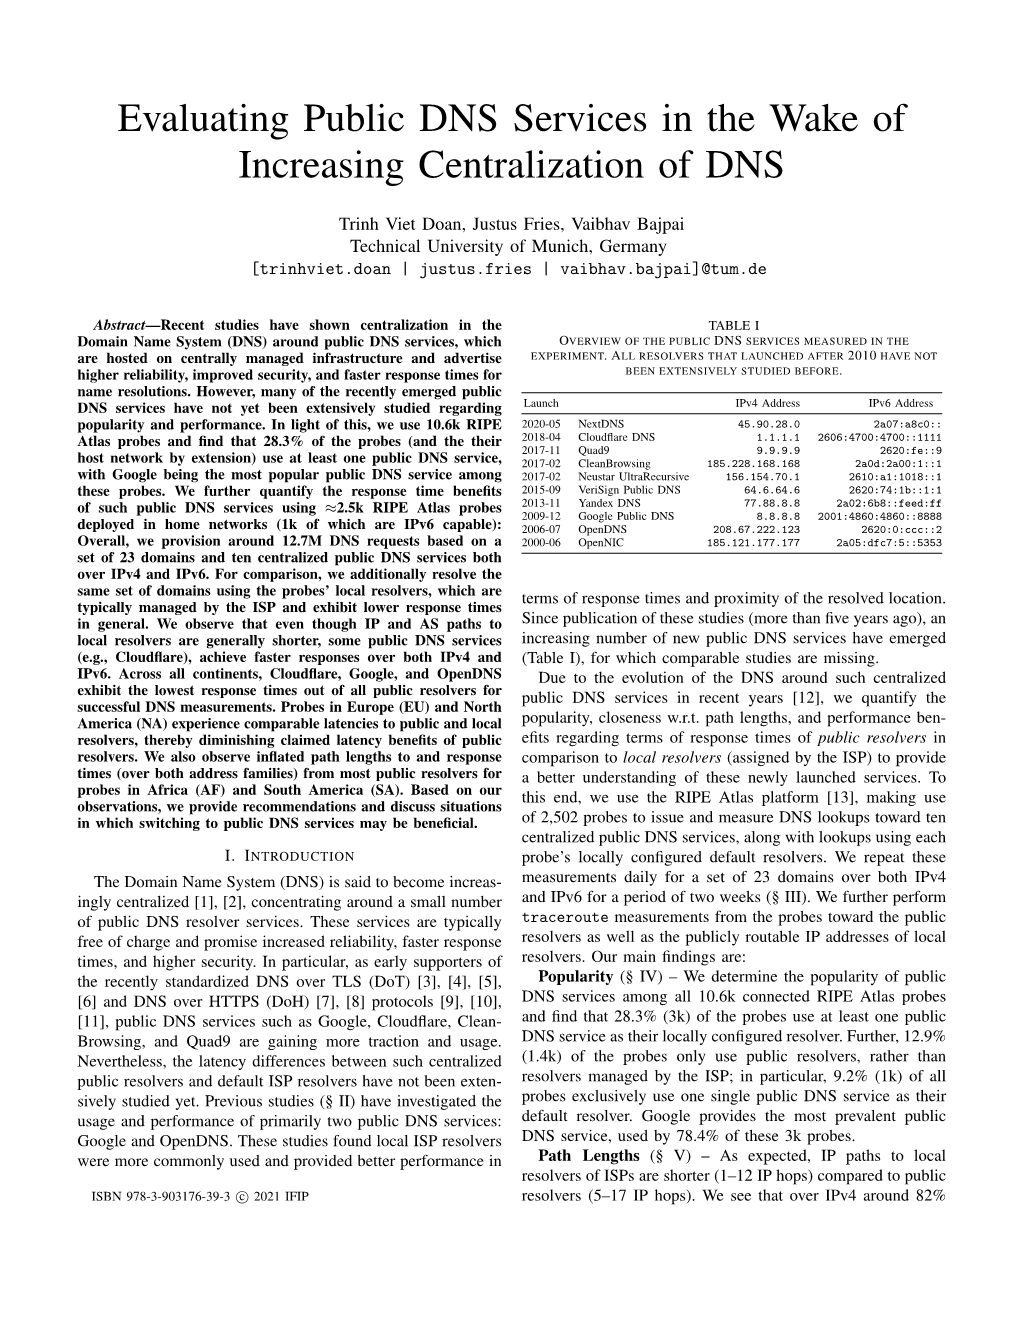 Evaluating Public DNS Services in the Wake of Increasing Centralization of DNS